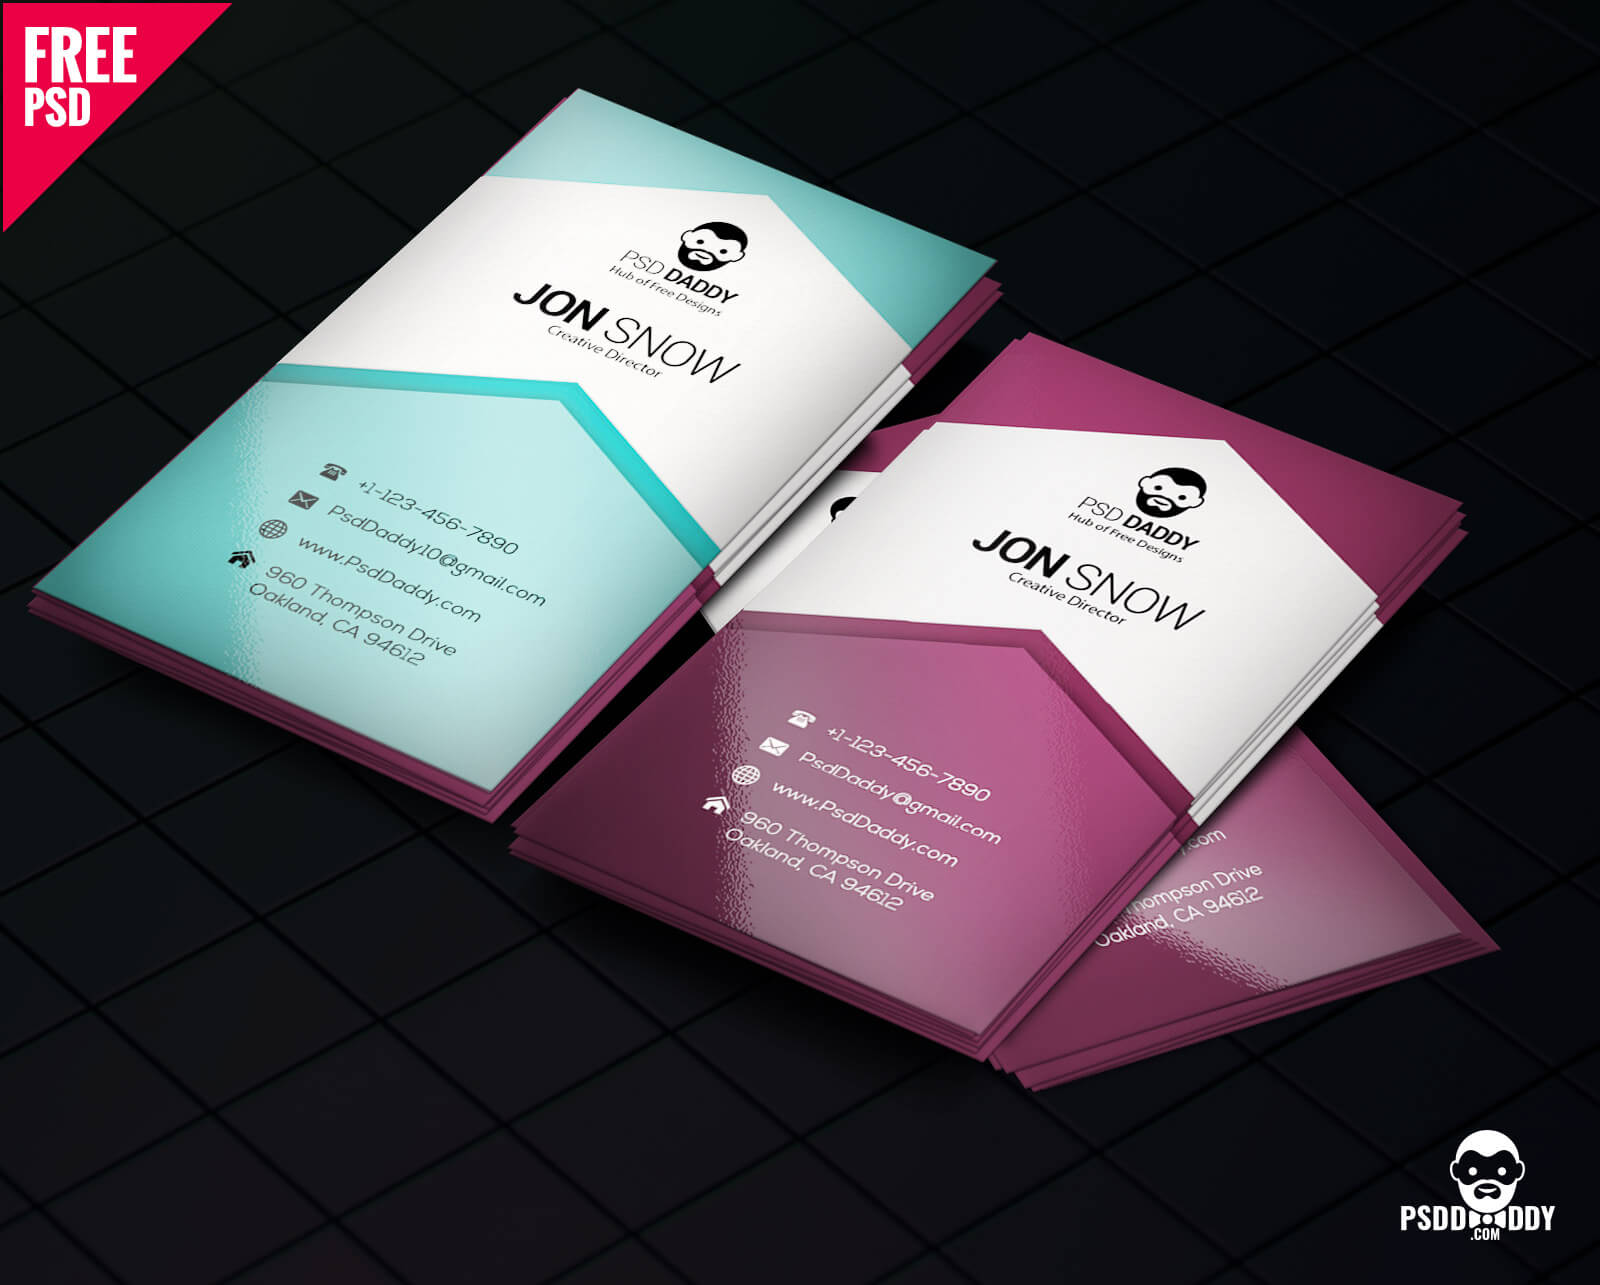 Download]Creative Business Card Psd Free | Psddaddy With Regard To Visiting Card Template Psd Free Download